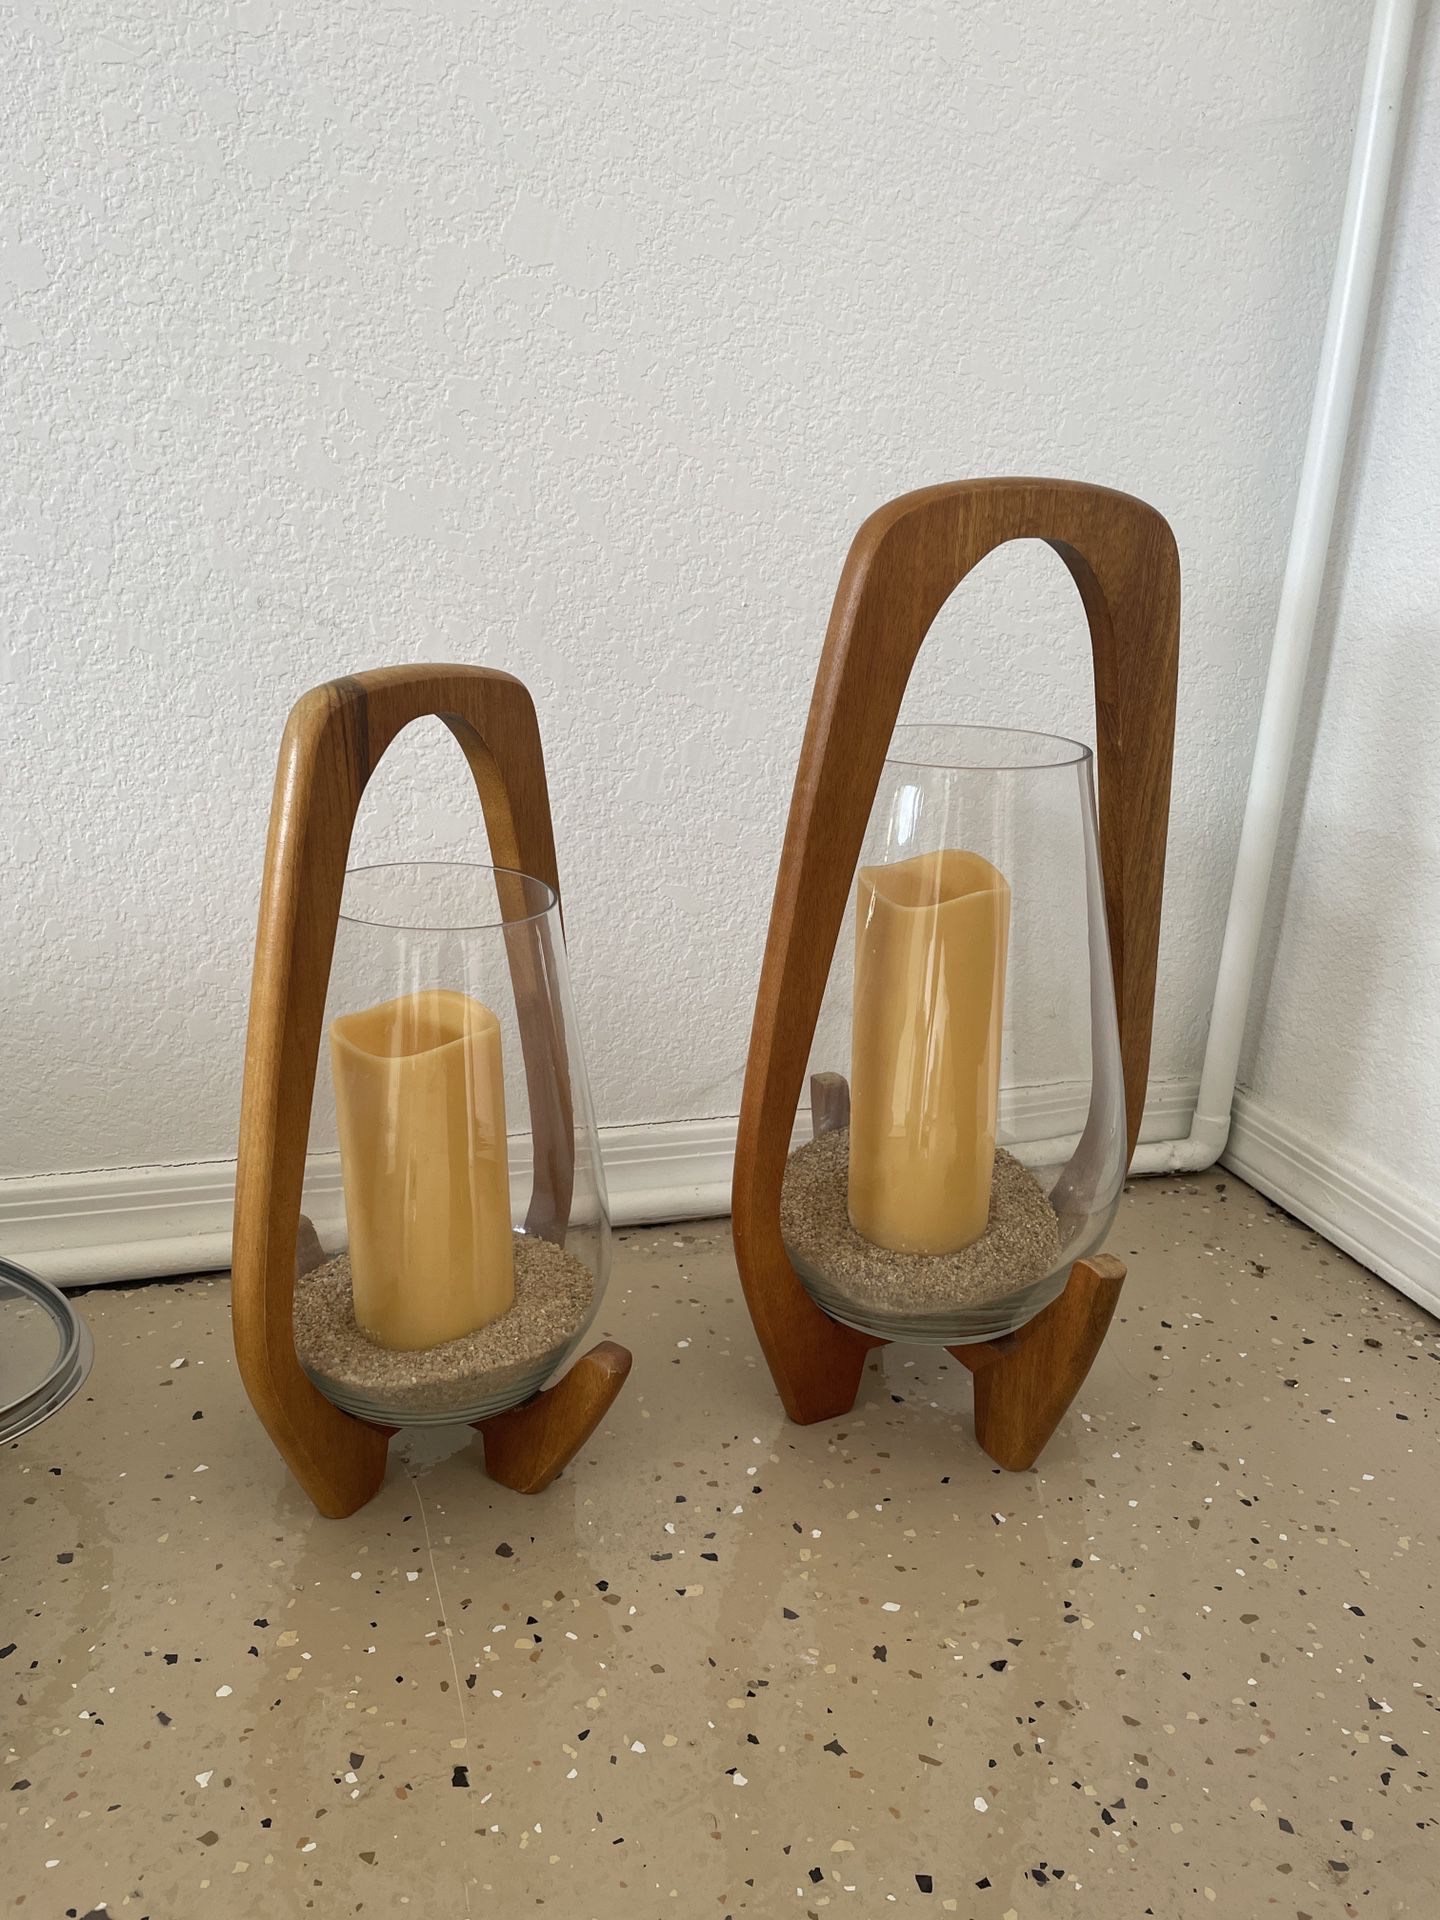 MCM Style Candle Holder